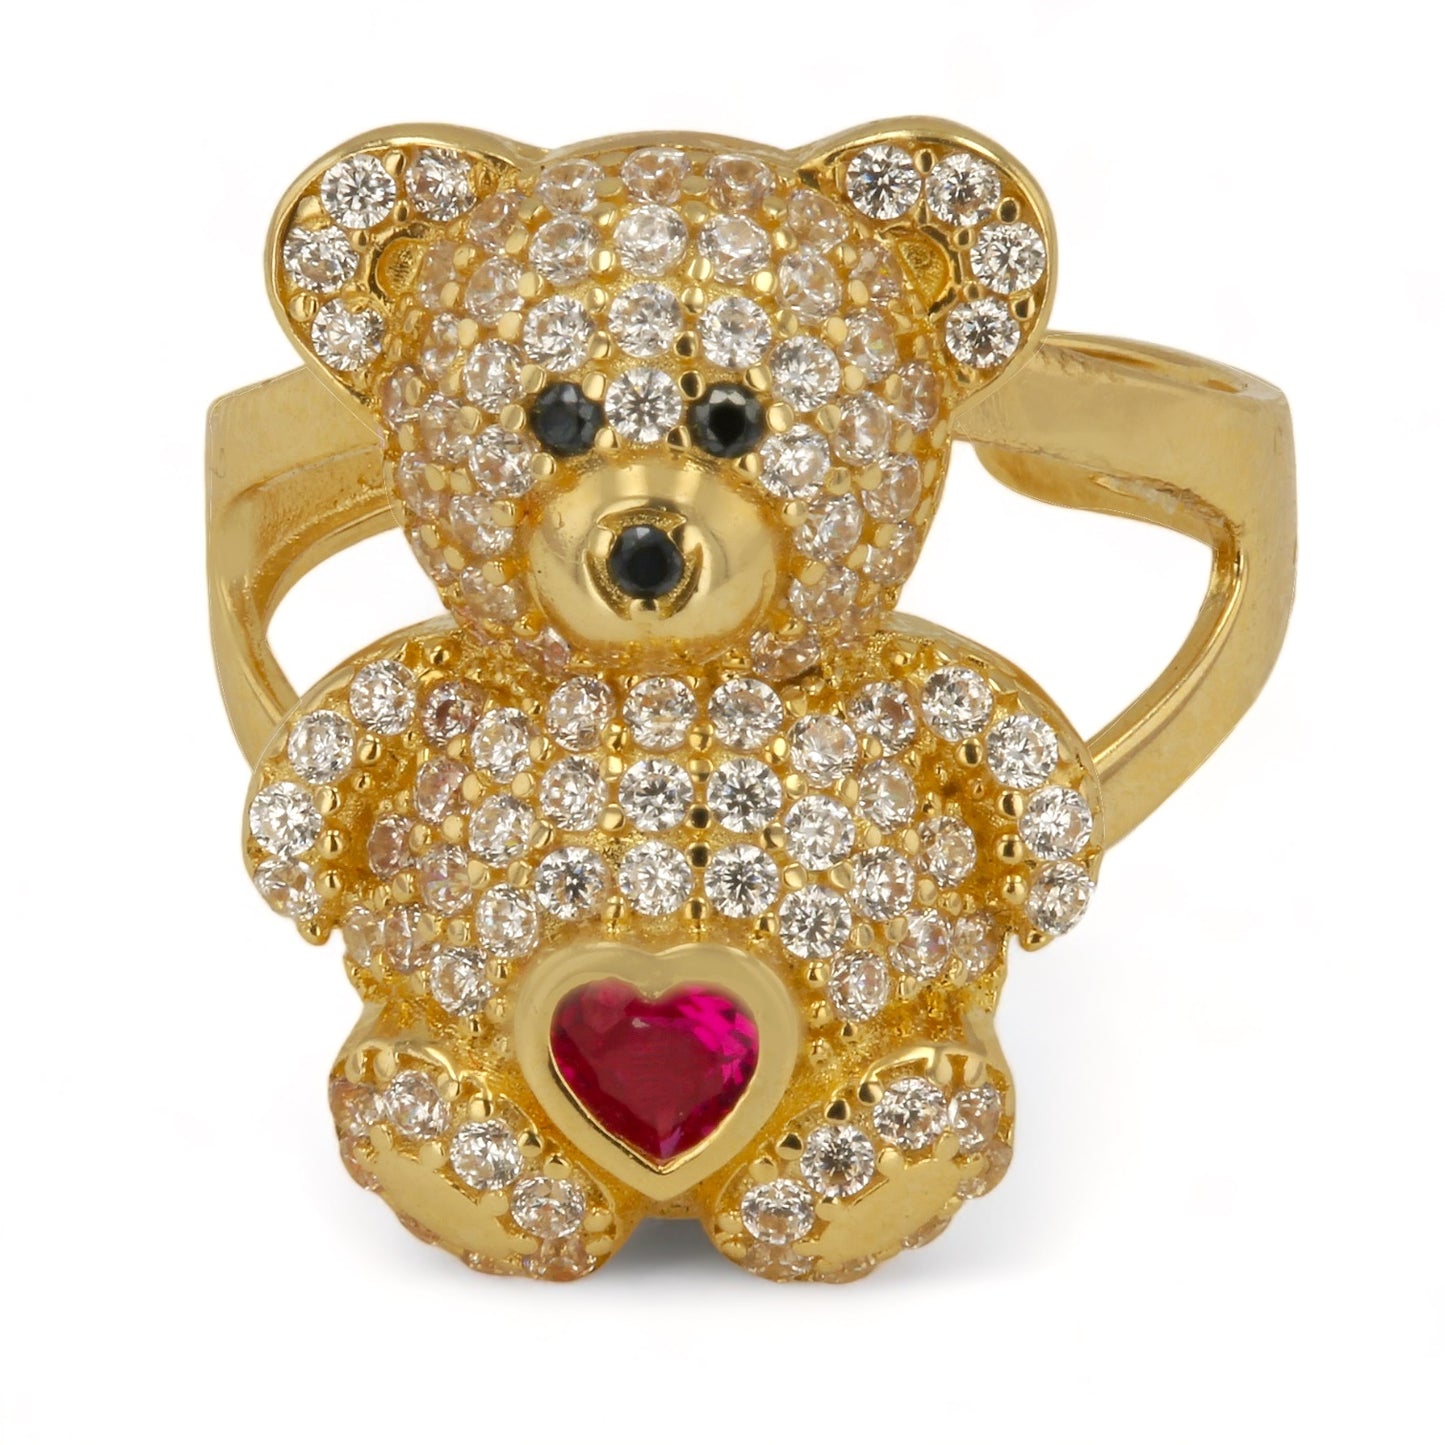 14K Yellow Gold Teddy Bear Ring with Red Stone and CZ - 224567